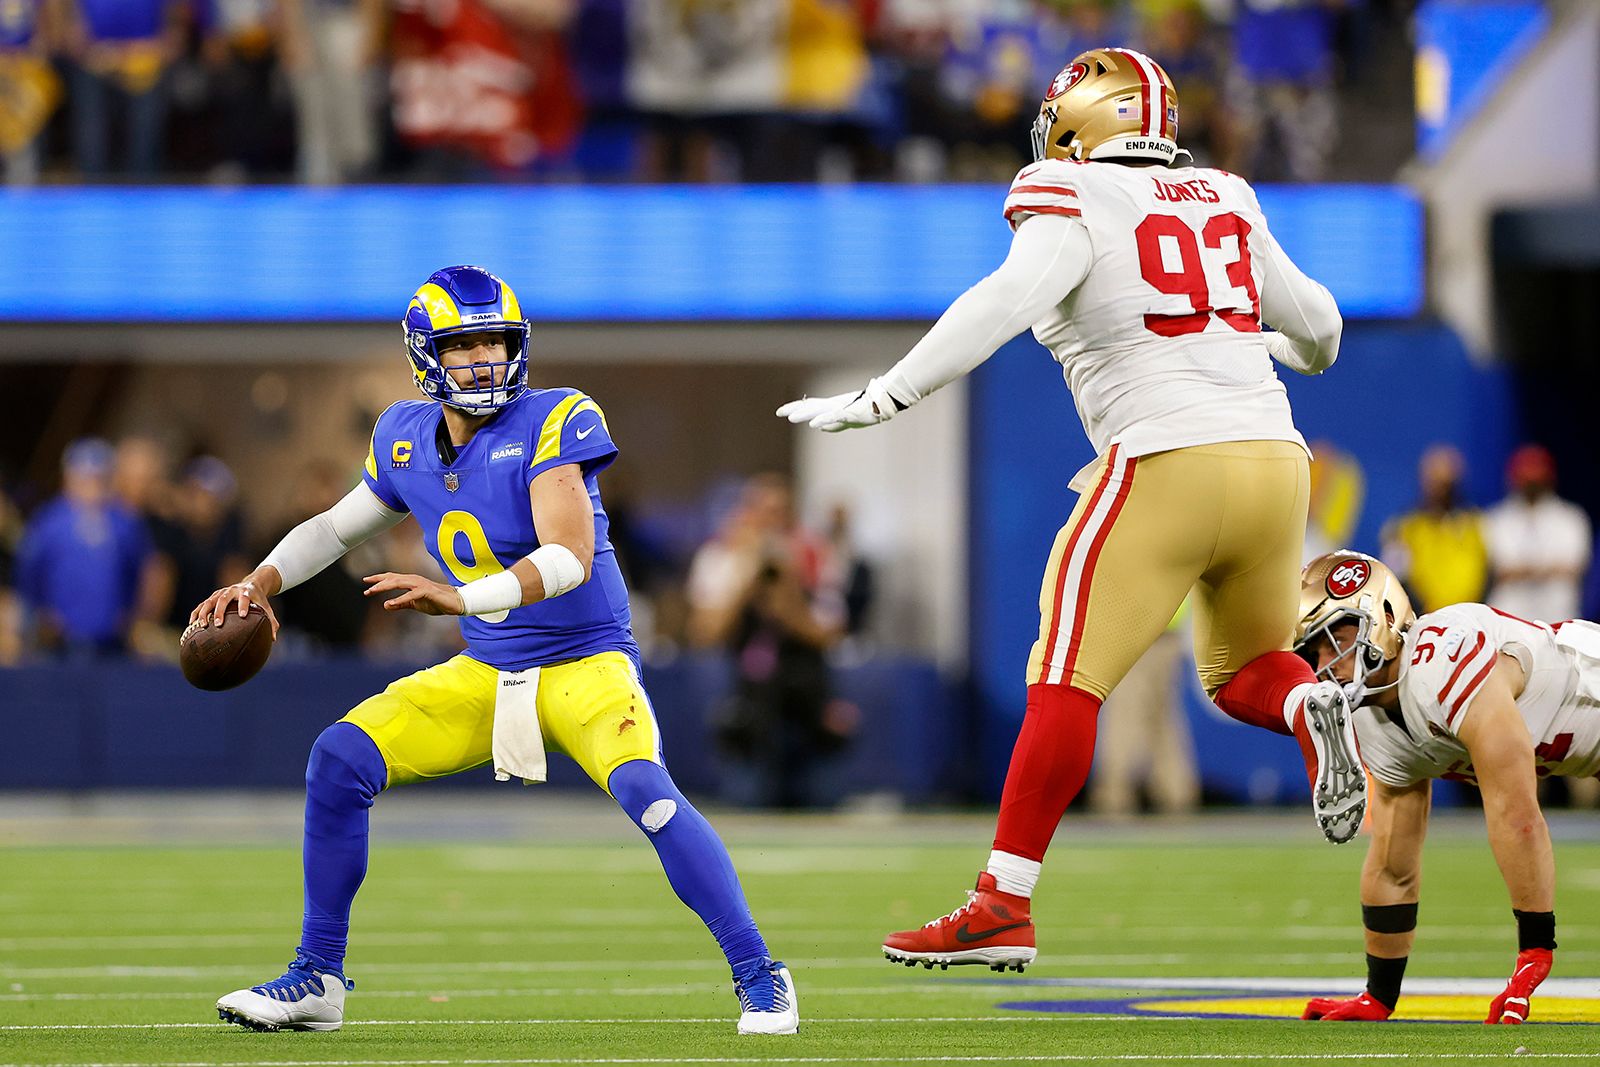 Rams rally to Super Bowl with stunning 20-17 win over Niners